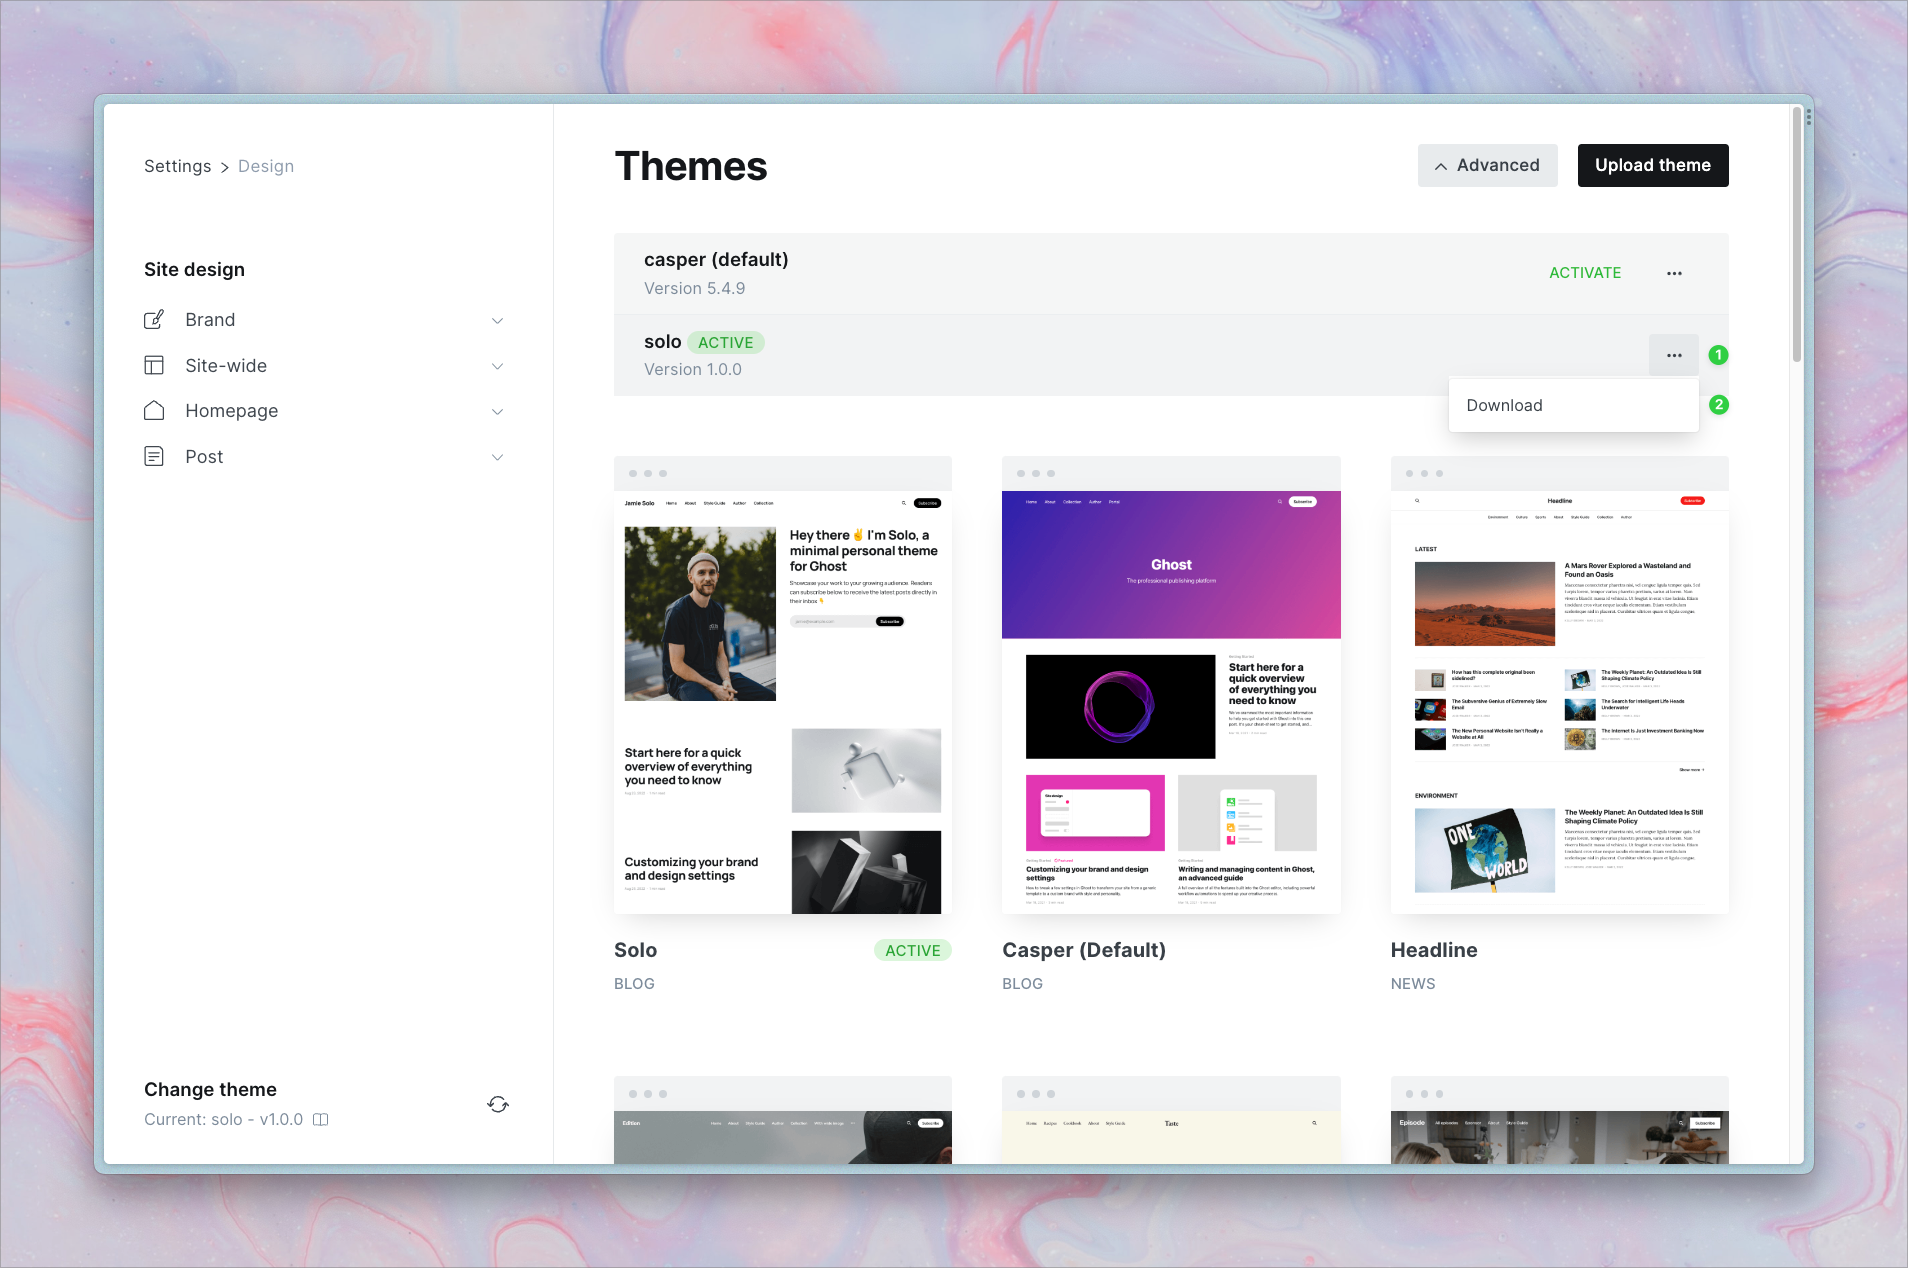 Themes page with Download option highlighted